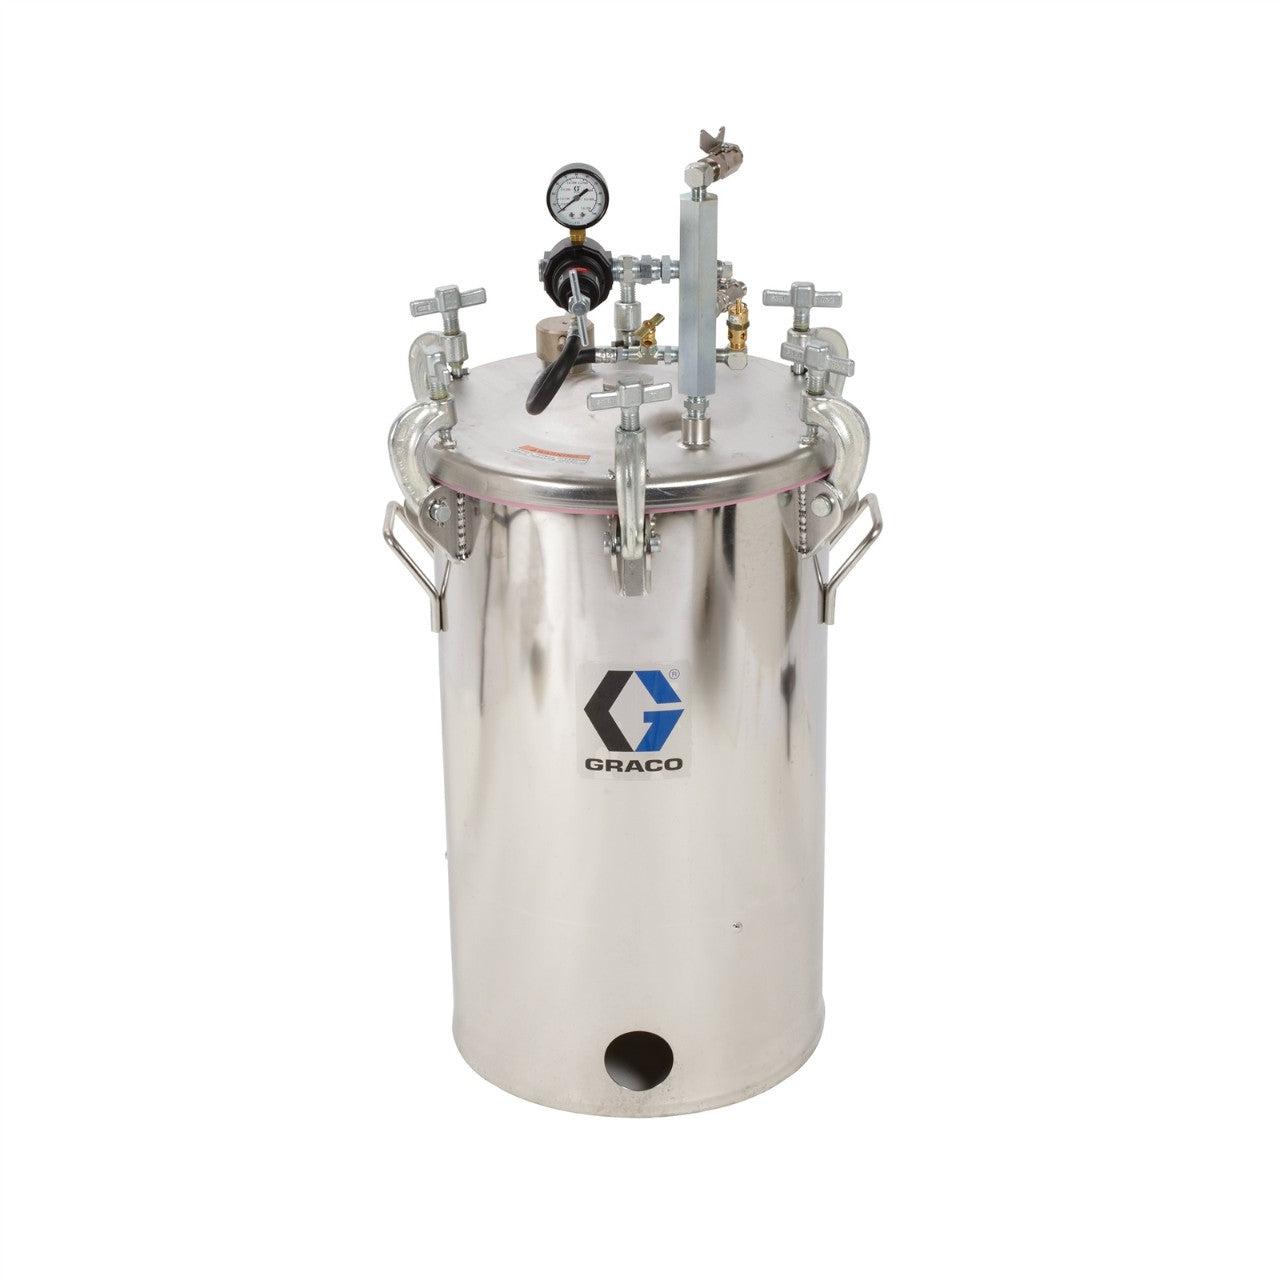 10 Gallon Low Pressure (HVLP) Pot, Regulated to 15 psi, ASME Rated, 33.9 in (88 cm), 76 lbs (35 kg), SST